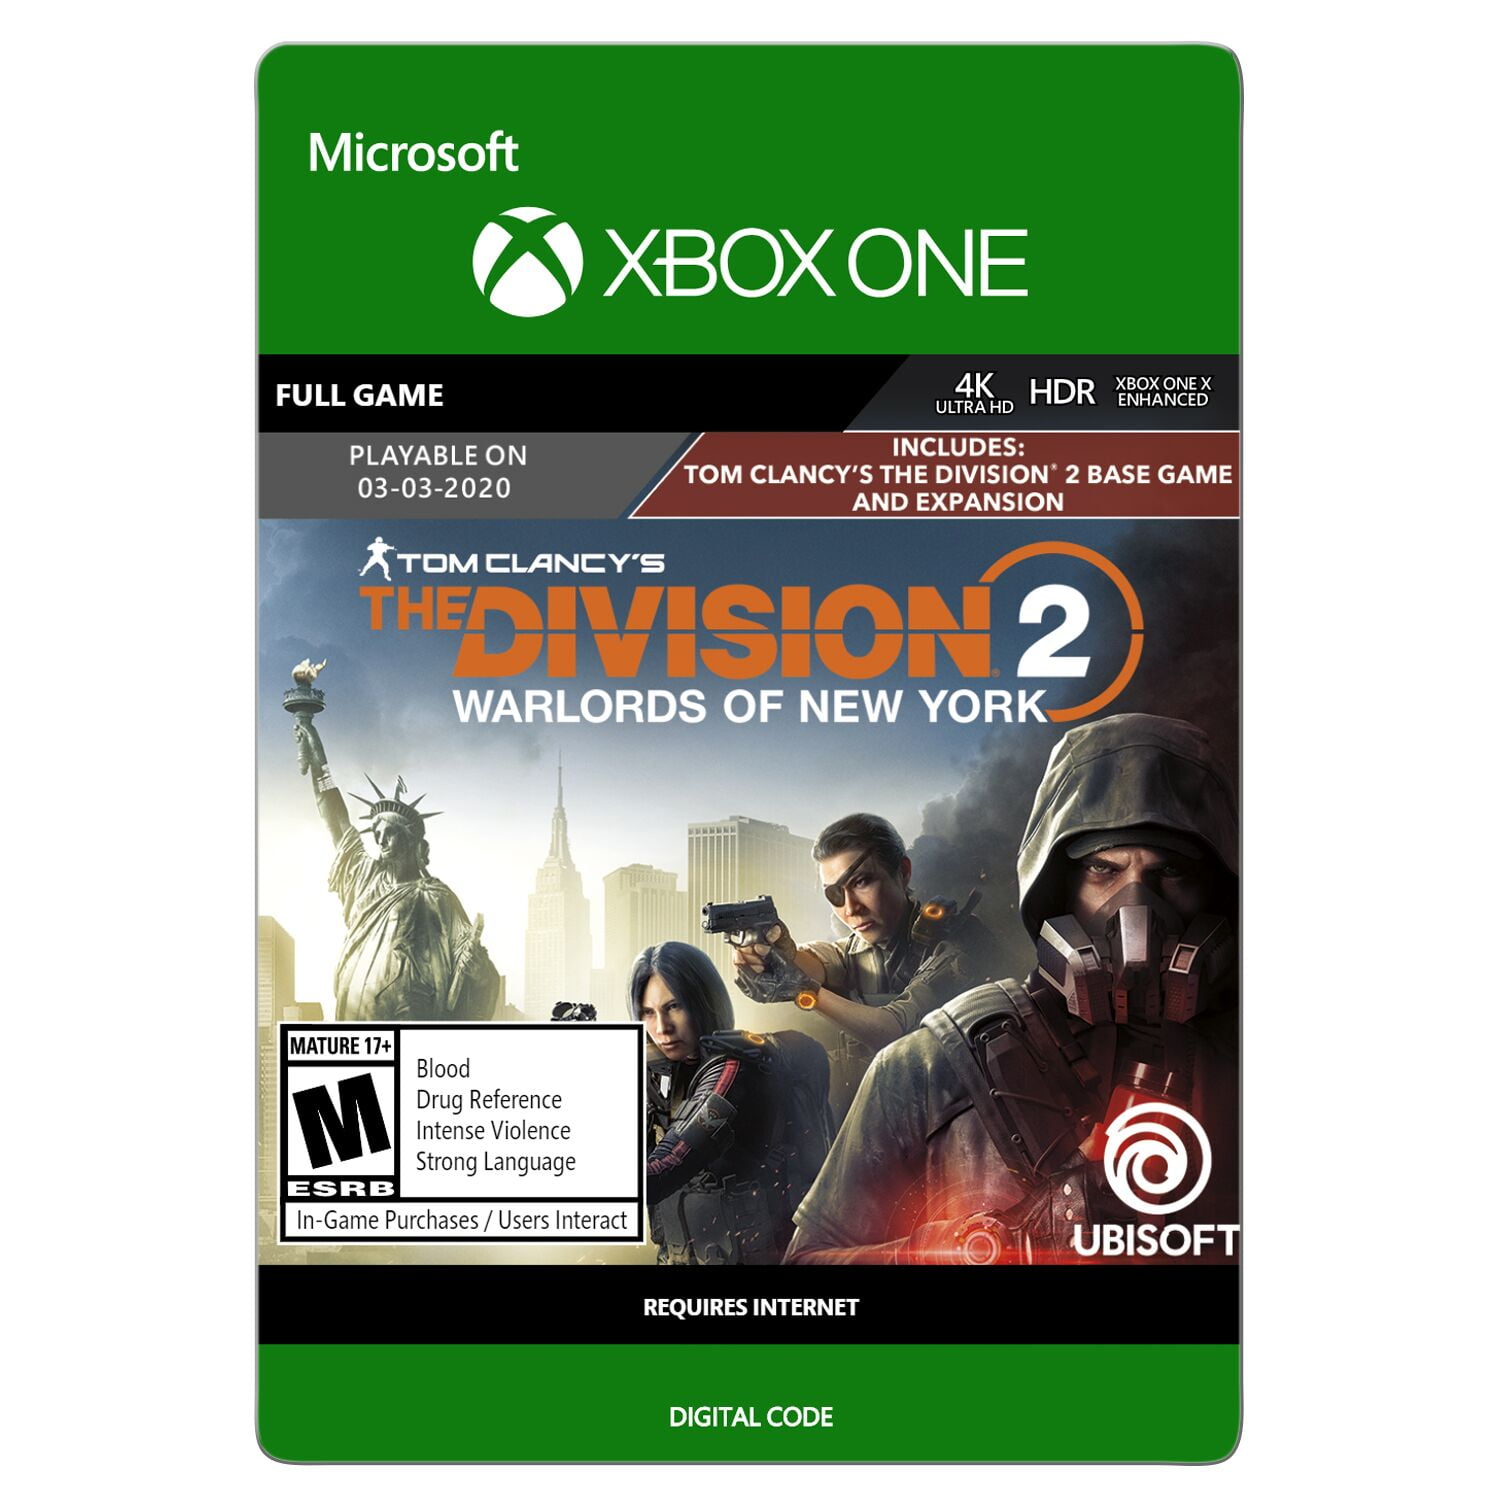 the division 2 xbox digital download